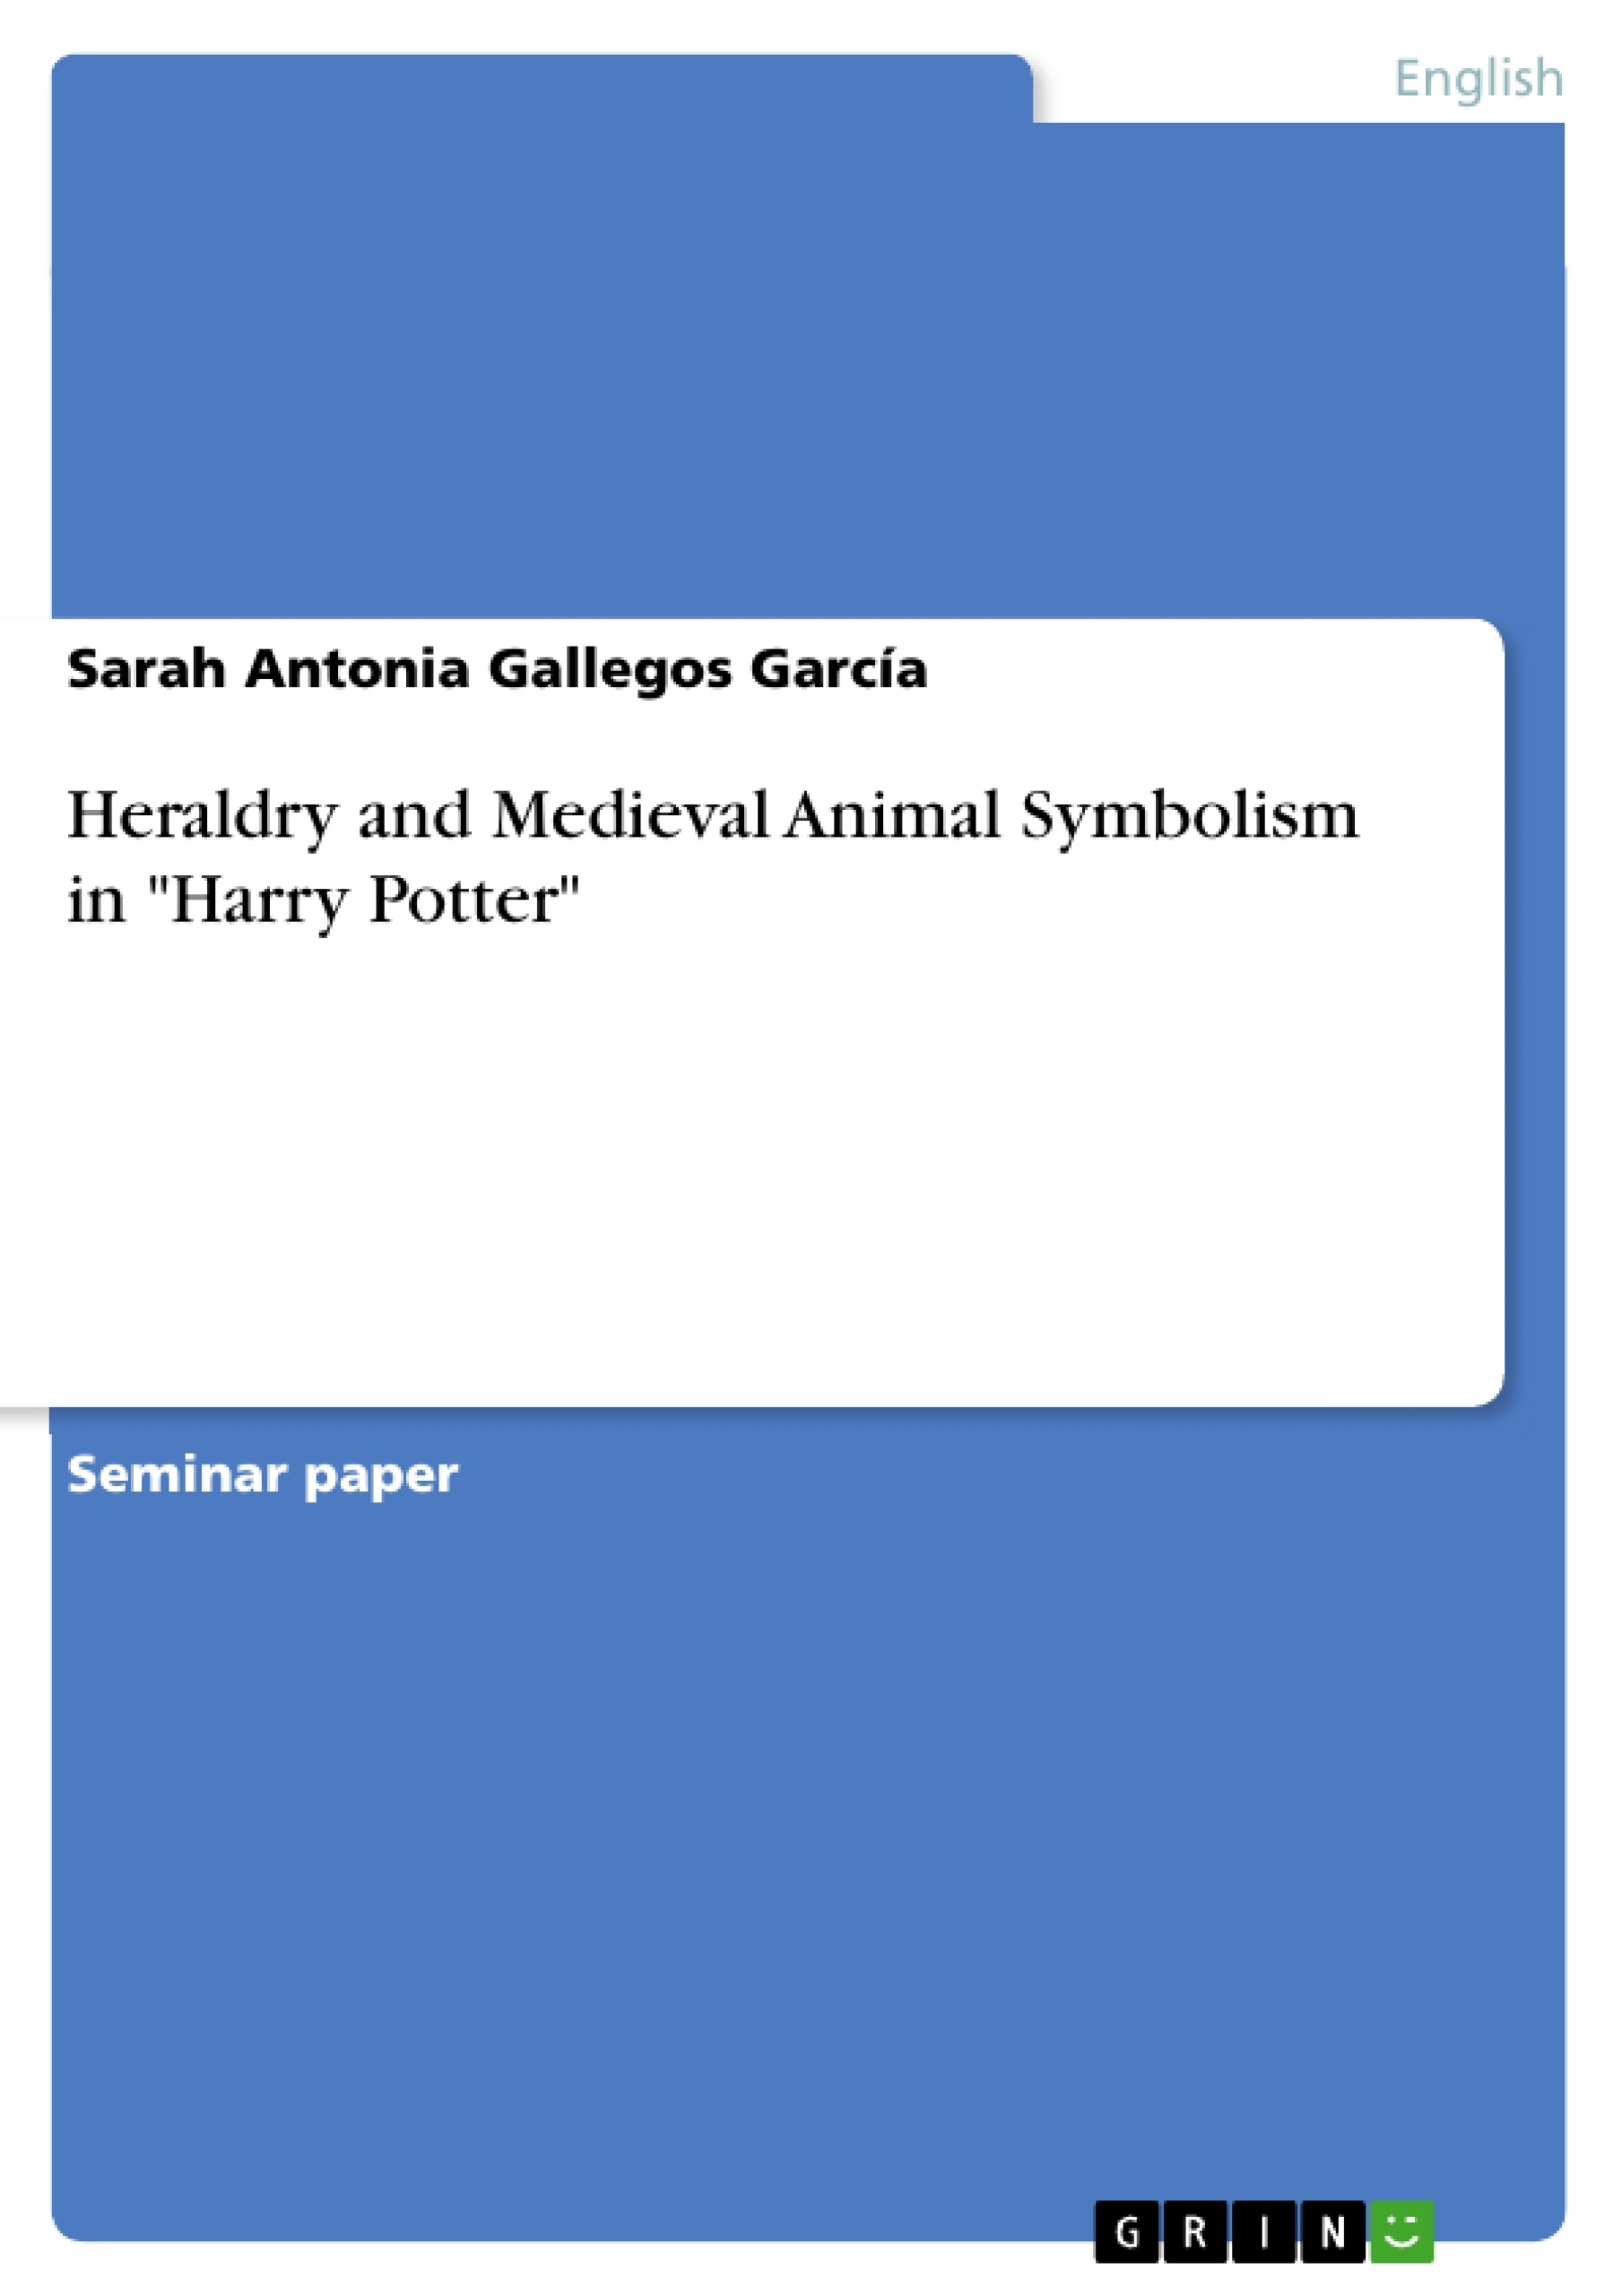 Title: Heraldry and Medieval Animal Symbolism in "Harry Potter"